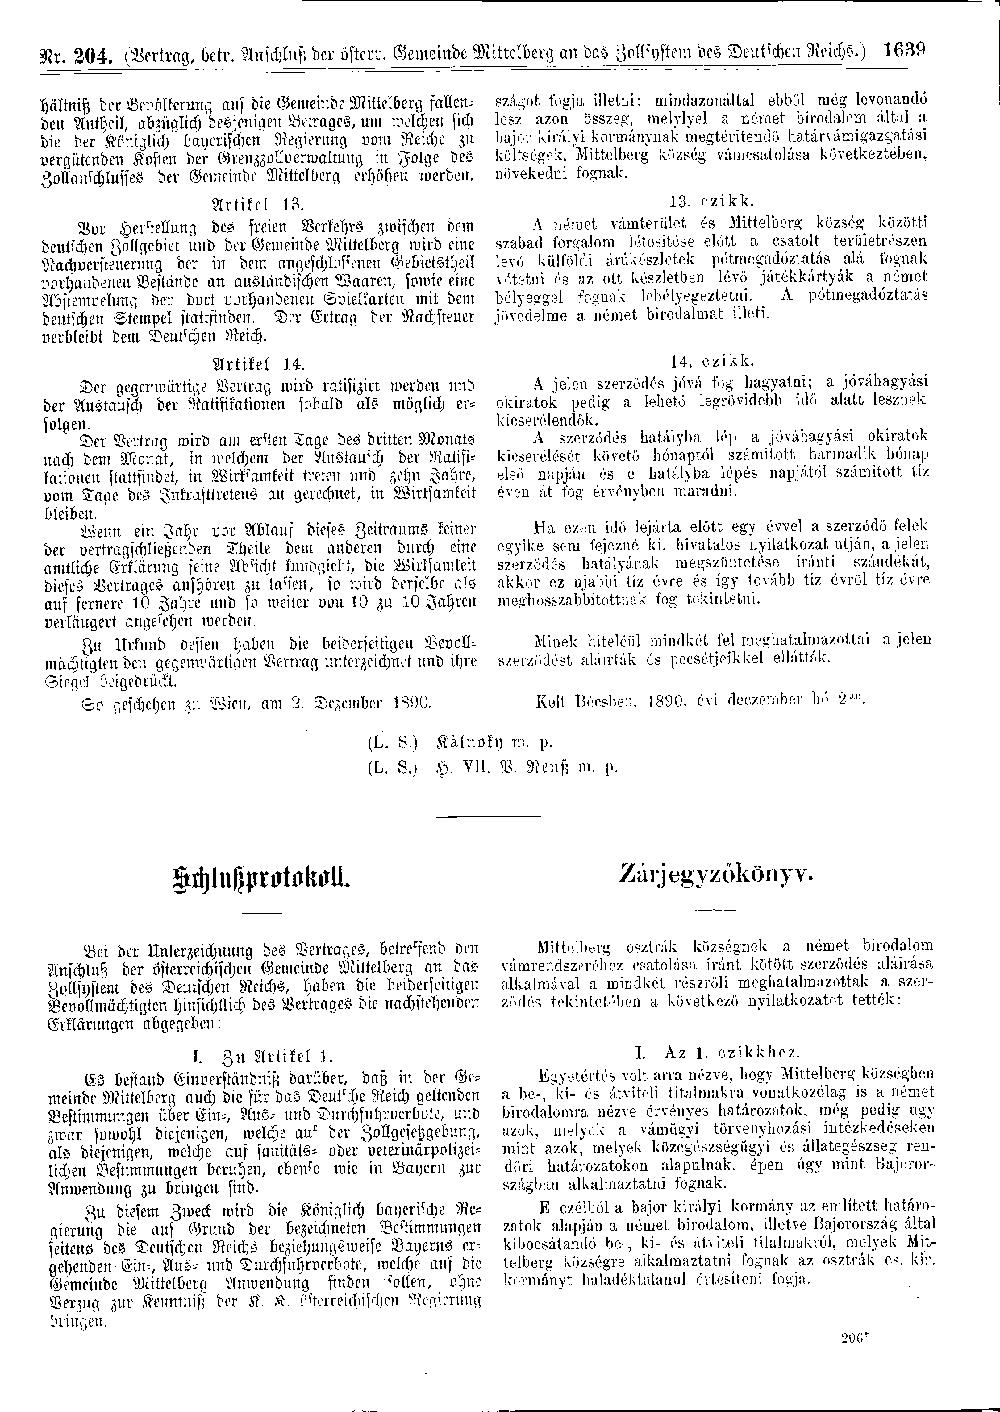 Scan of page 1639